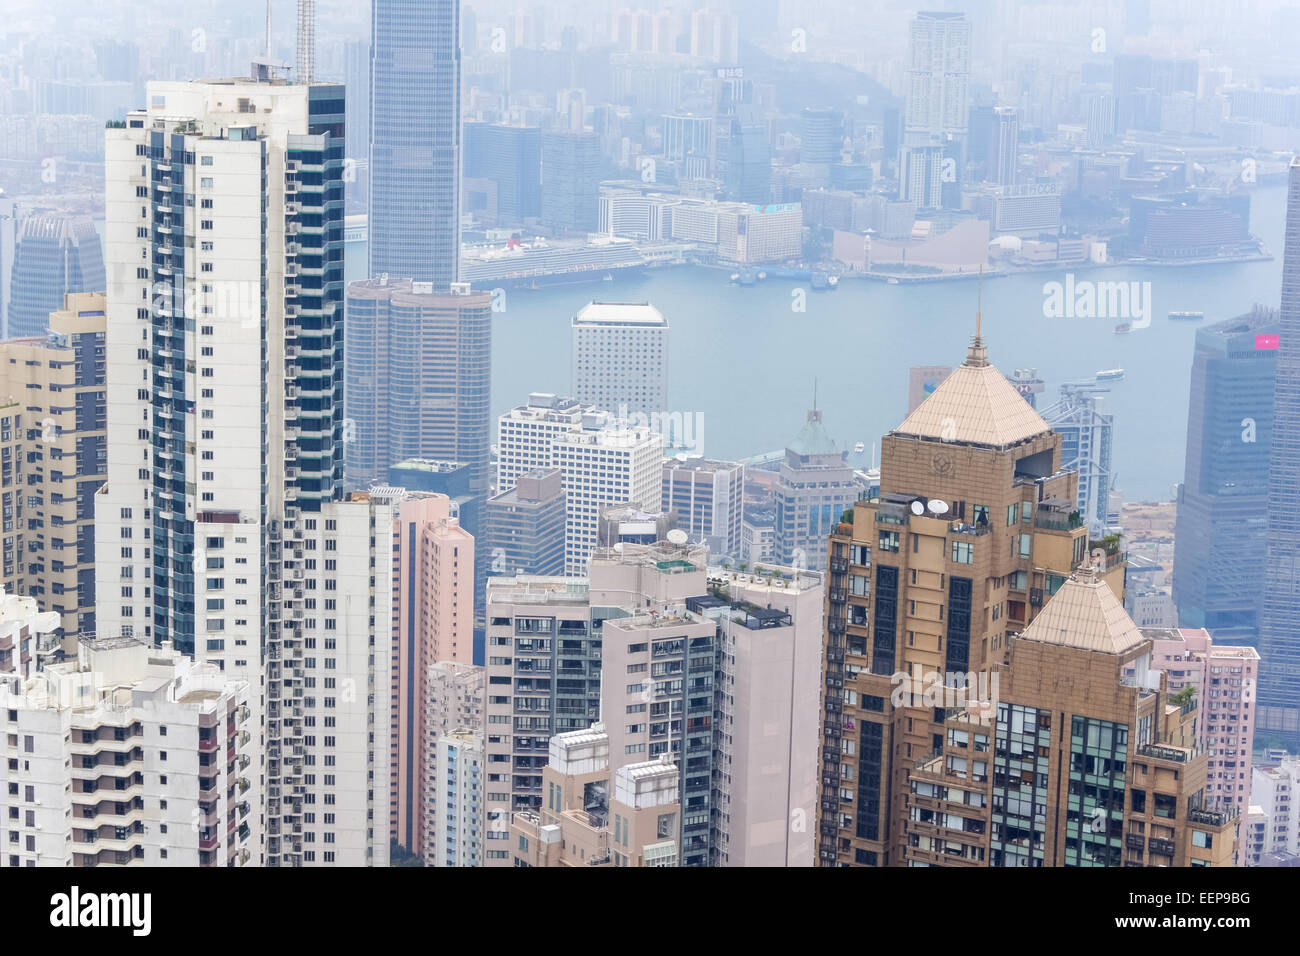 View of high rise residential apartments and commercial skyscrapers from The Peak, Hong Kong Island Stock Photo